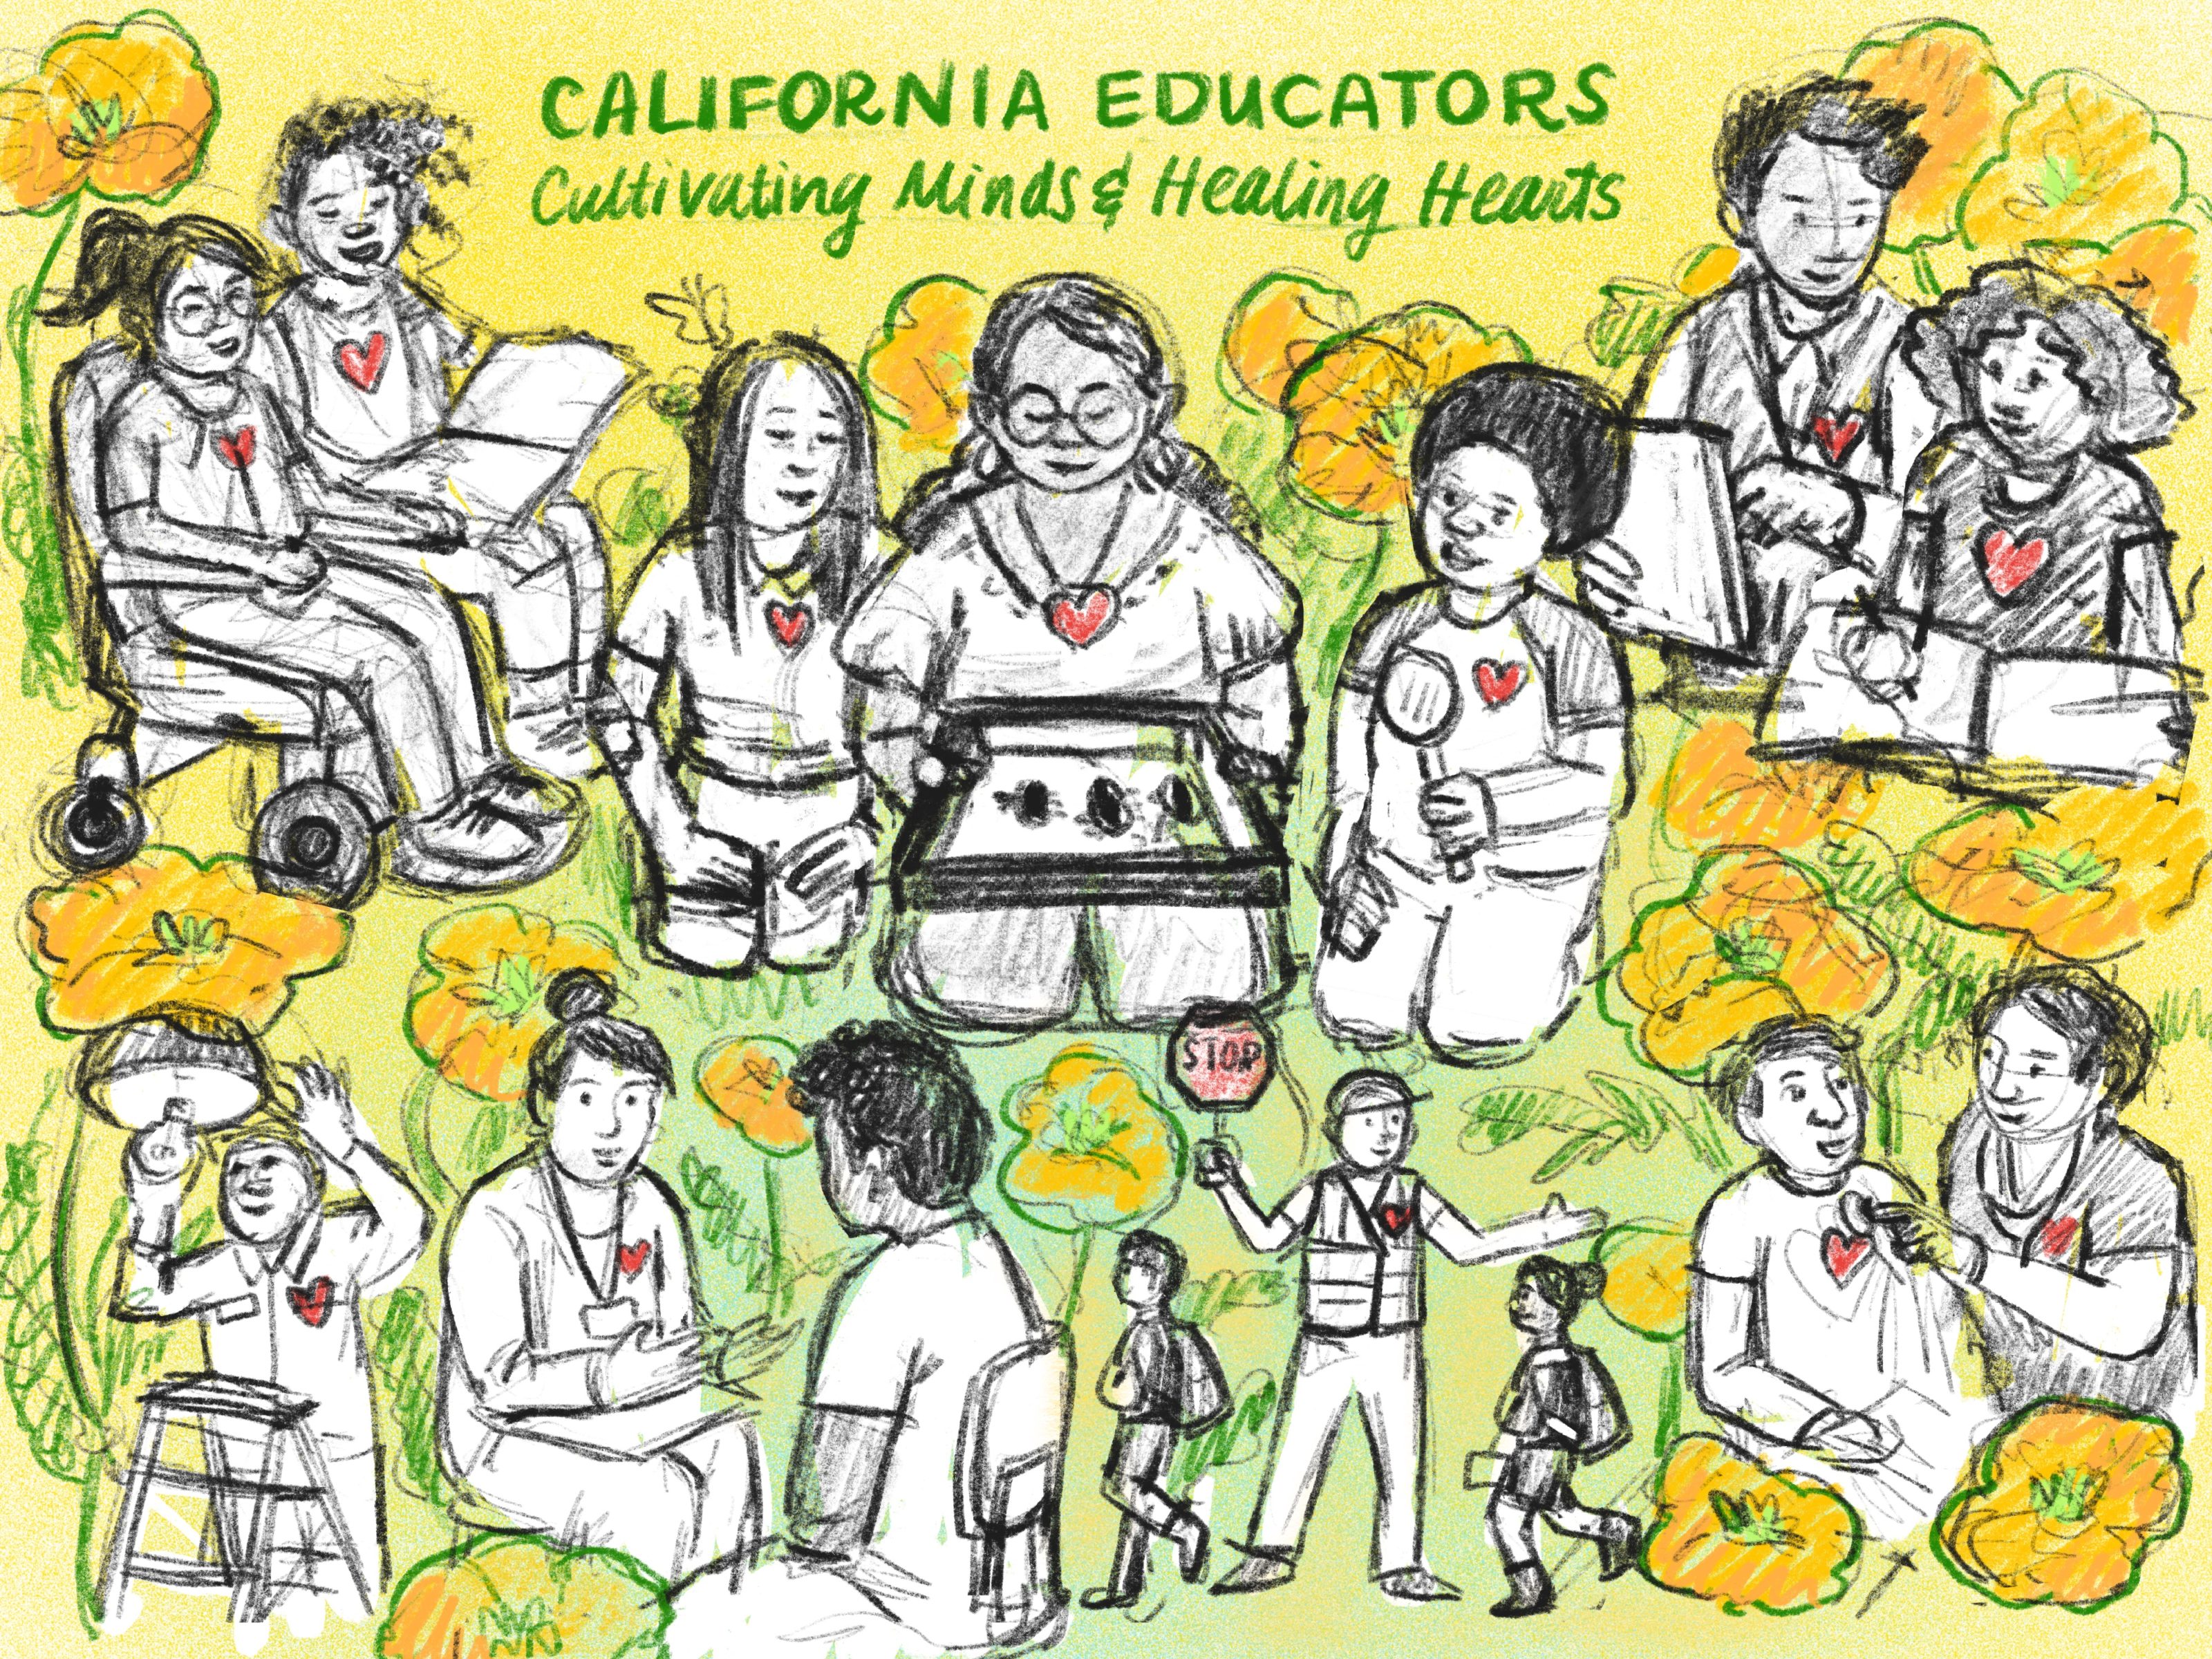 California Day of the Teacher poster for year 2021